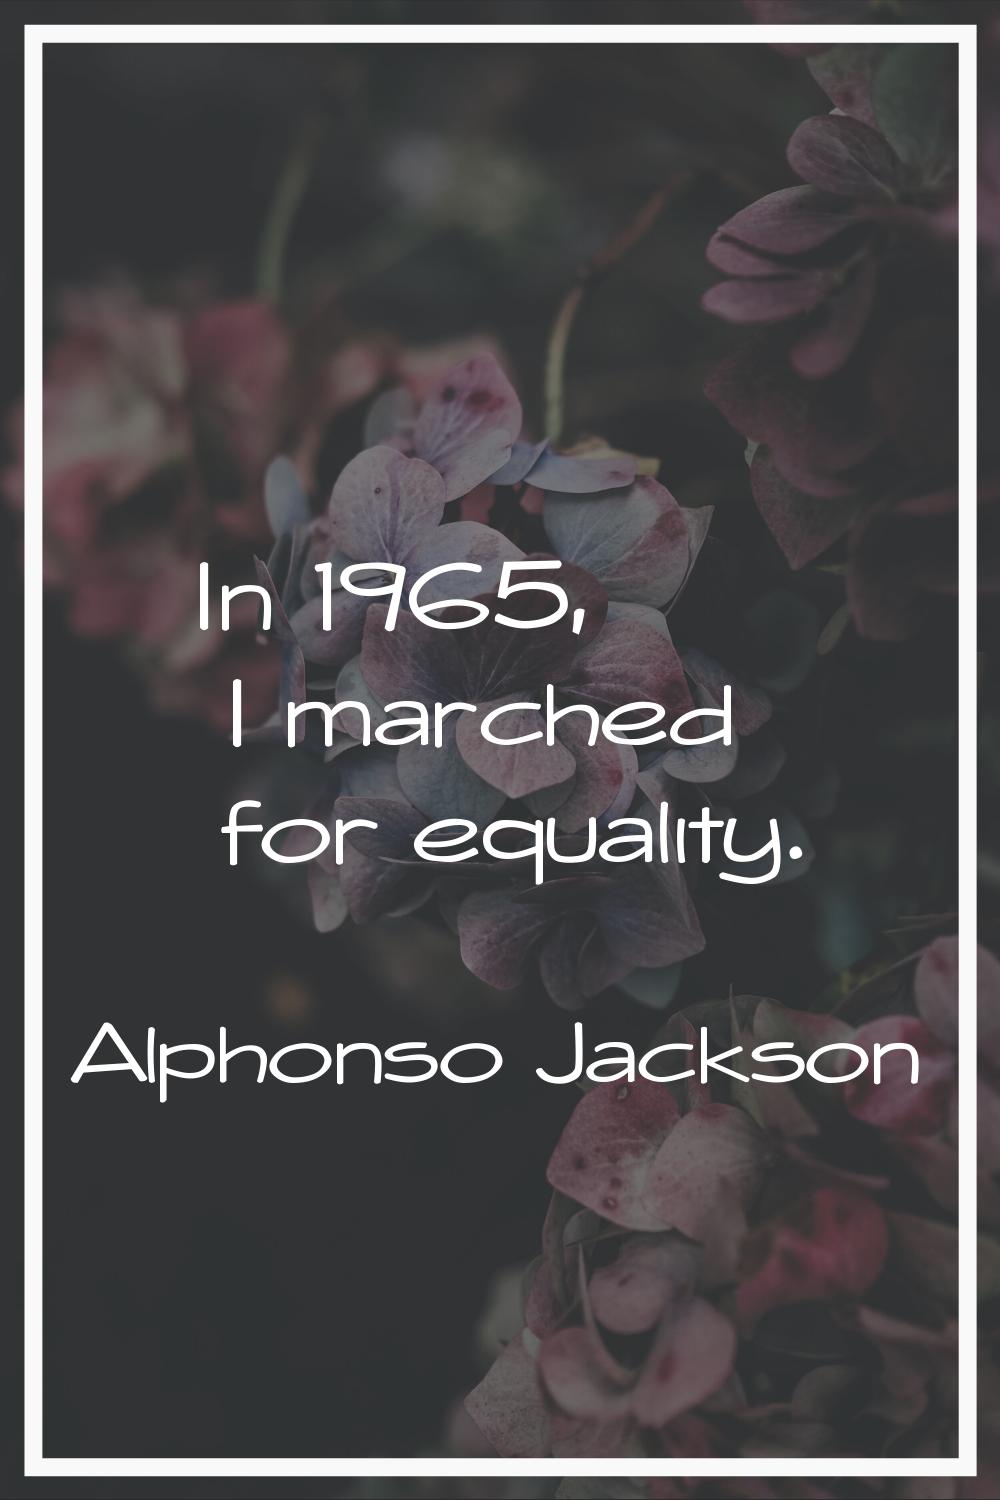 In 1965, I marched for equality.